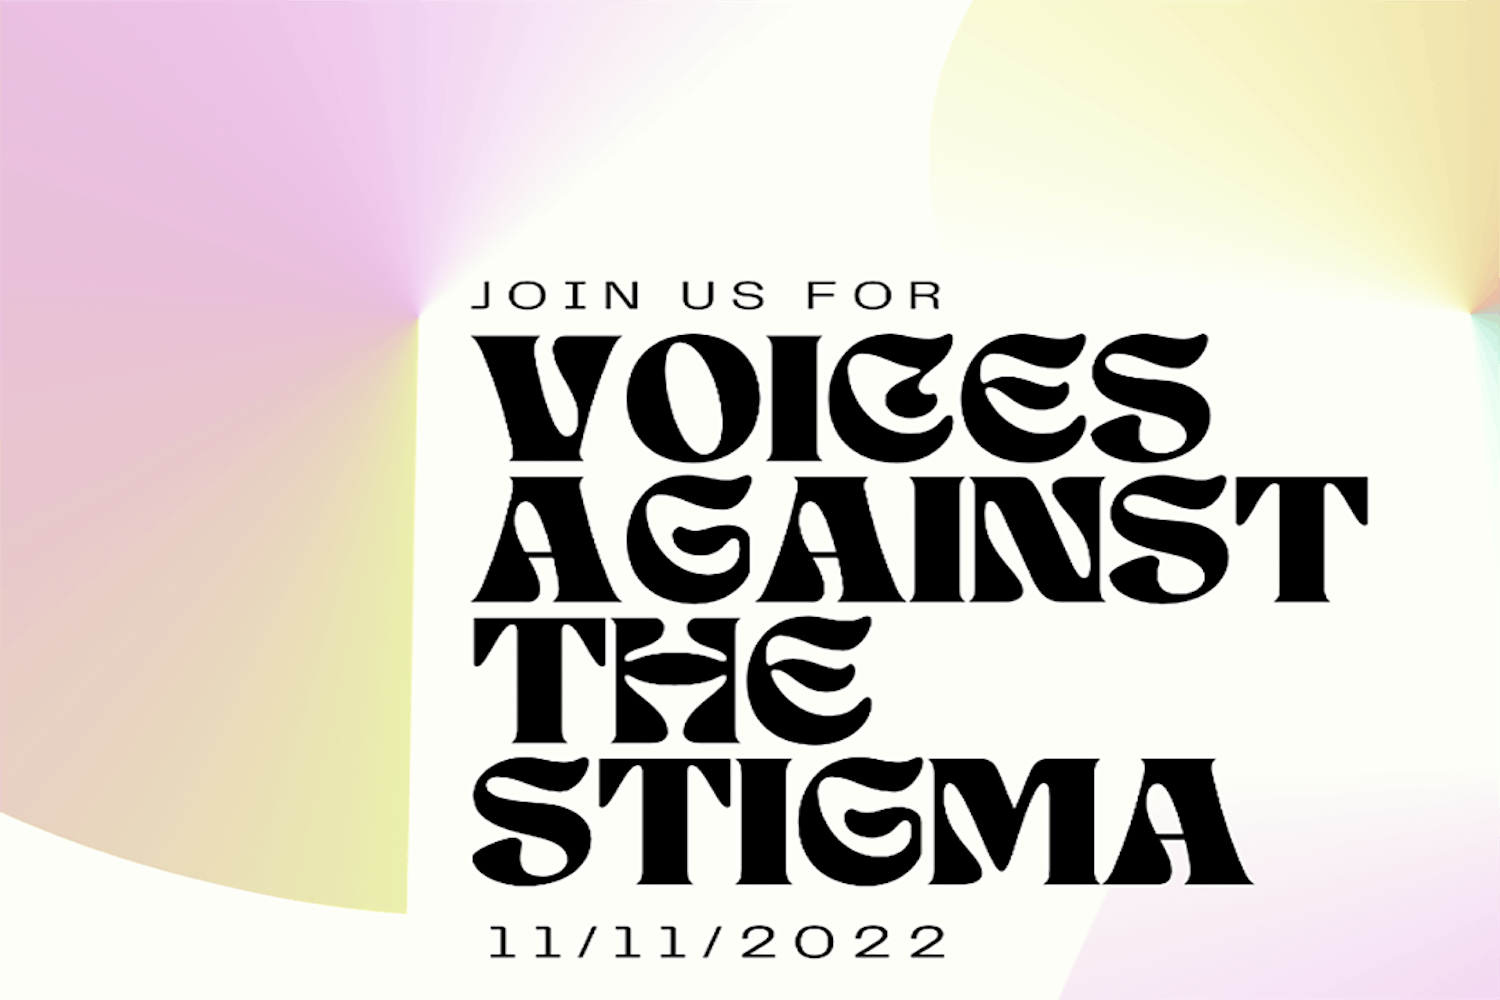 Graphic for Voices Against Stigma, local artists and performers will gather to perform to attendees in the Russell House Ballroom in support of mental health activism on Nov. 11, 2022. This mental health awareness concert is free for students and community members and aims to support local mental health organizations and erase the negative stigma surrounding mental health issues.